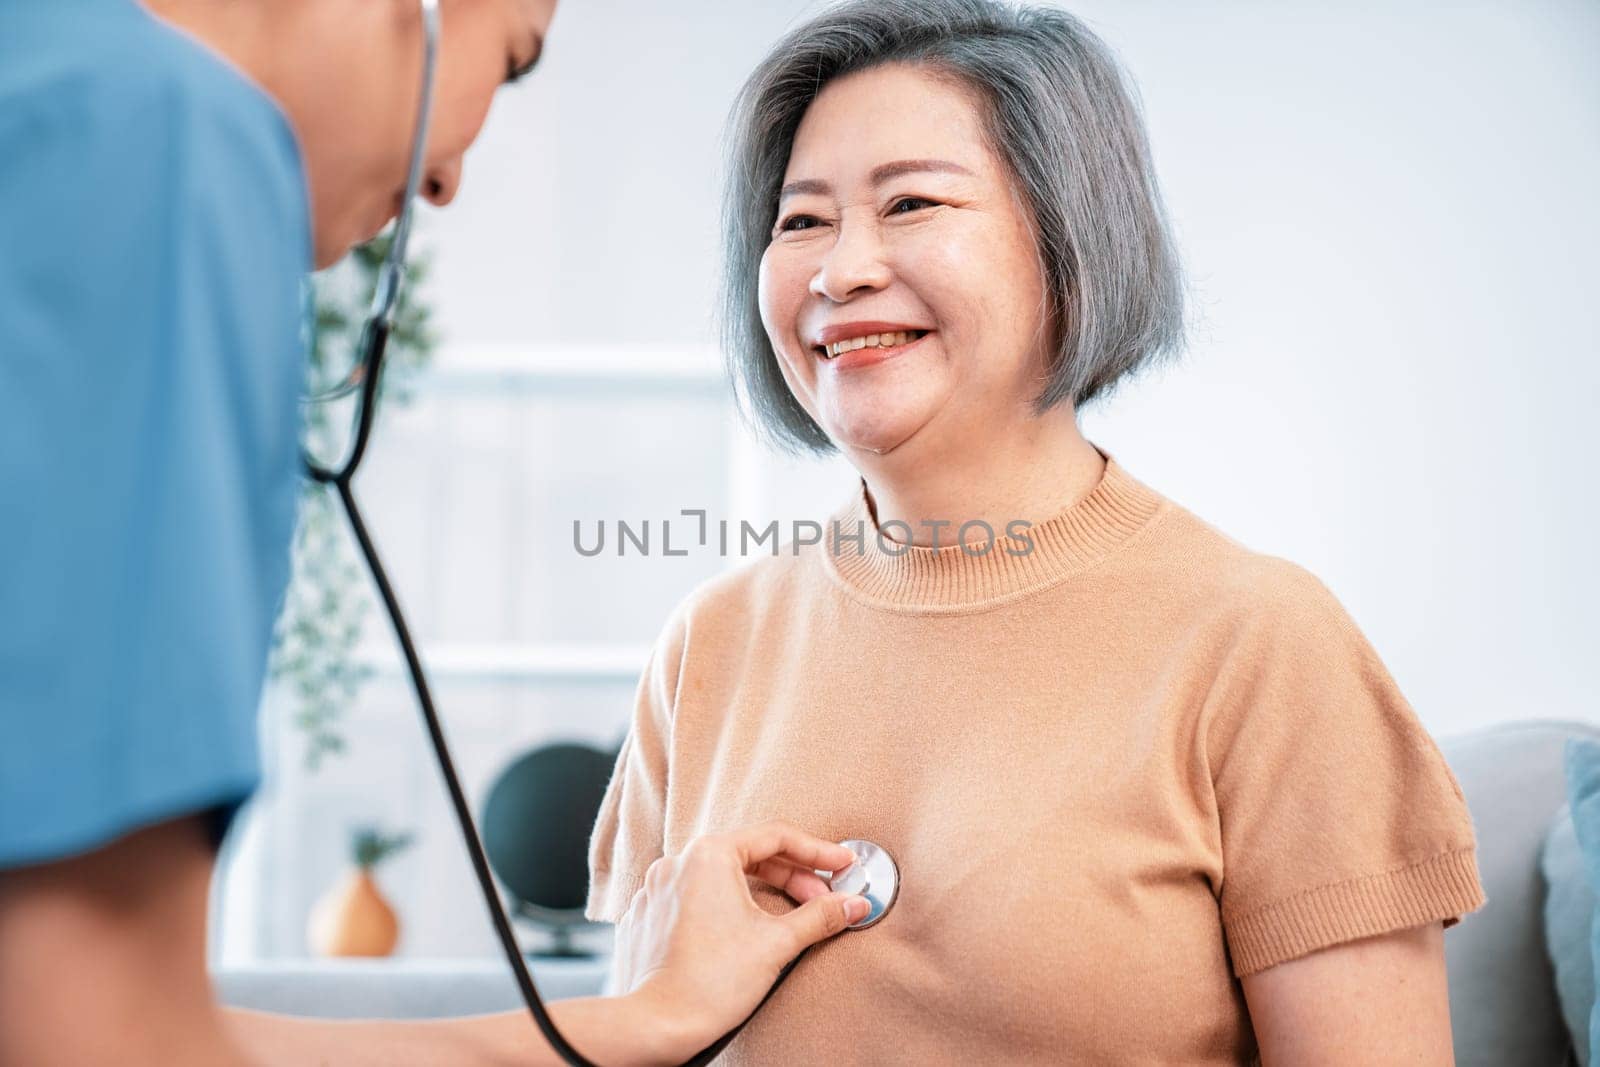 A contented retired senior woman being exterminated by her caregiver with a stethoscope at home. Medical care service, senior care at home.